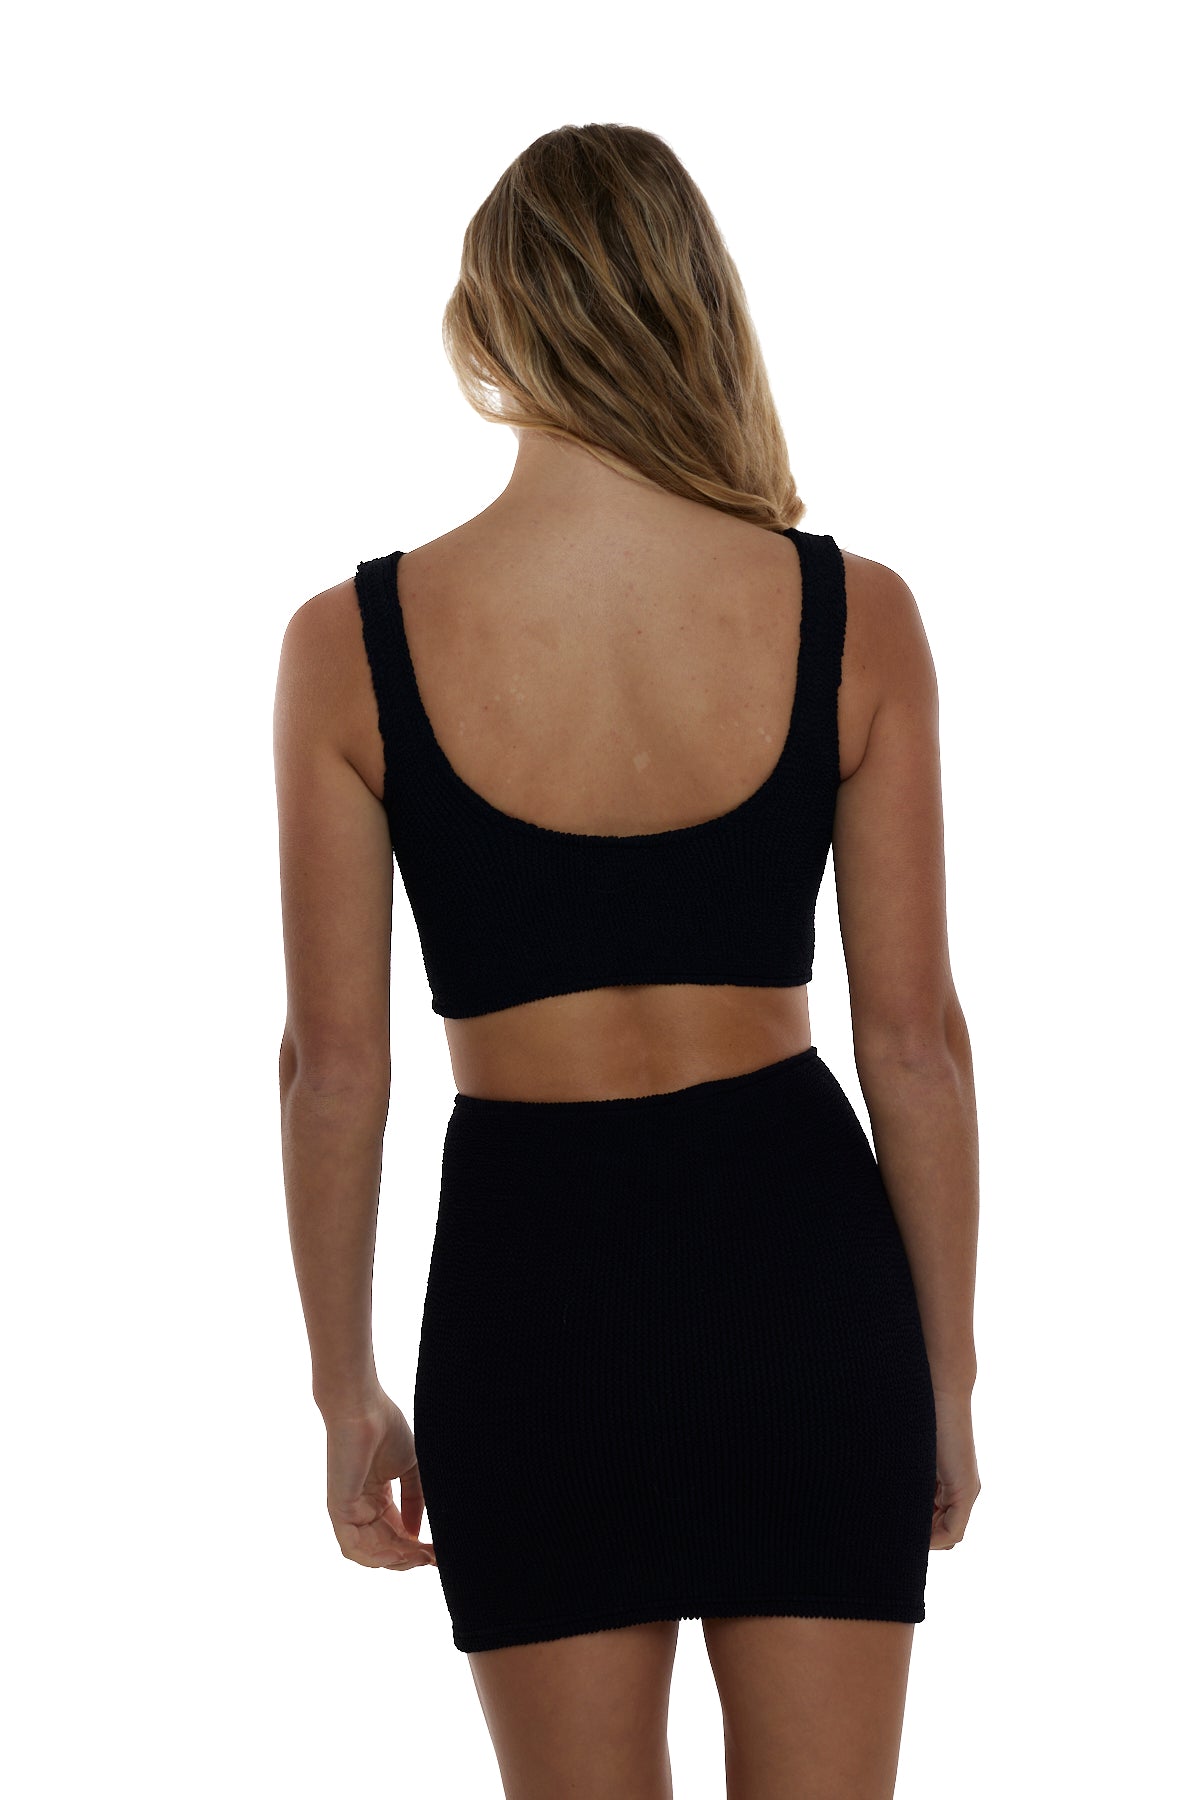 Cairo Crop Tankini Basic Crinkle Stretch One Size TOP ONLY (Black)